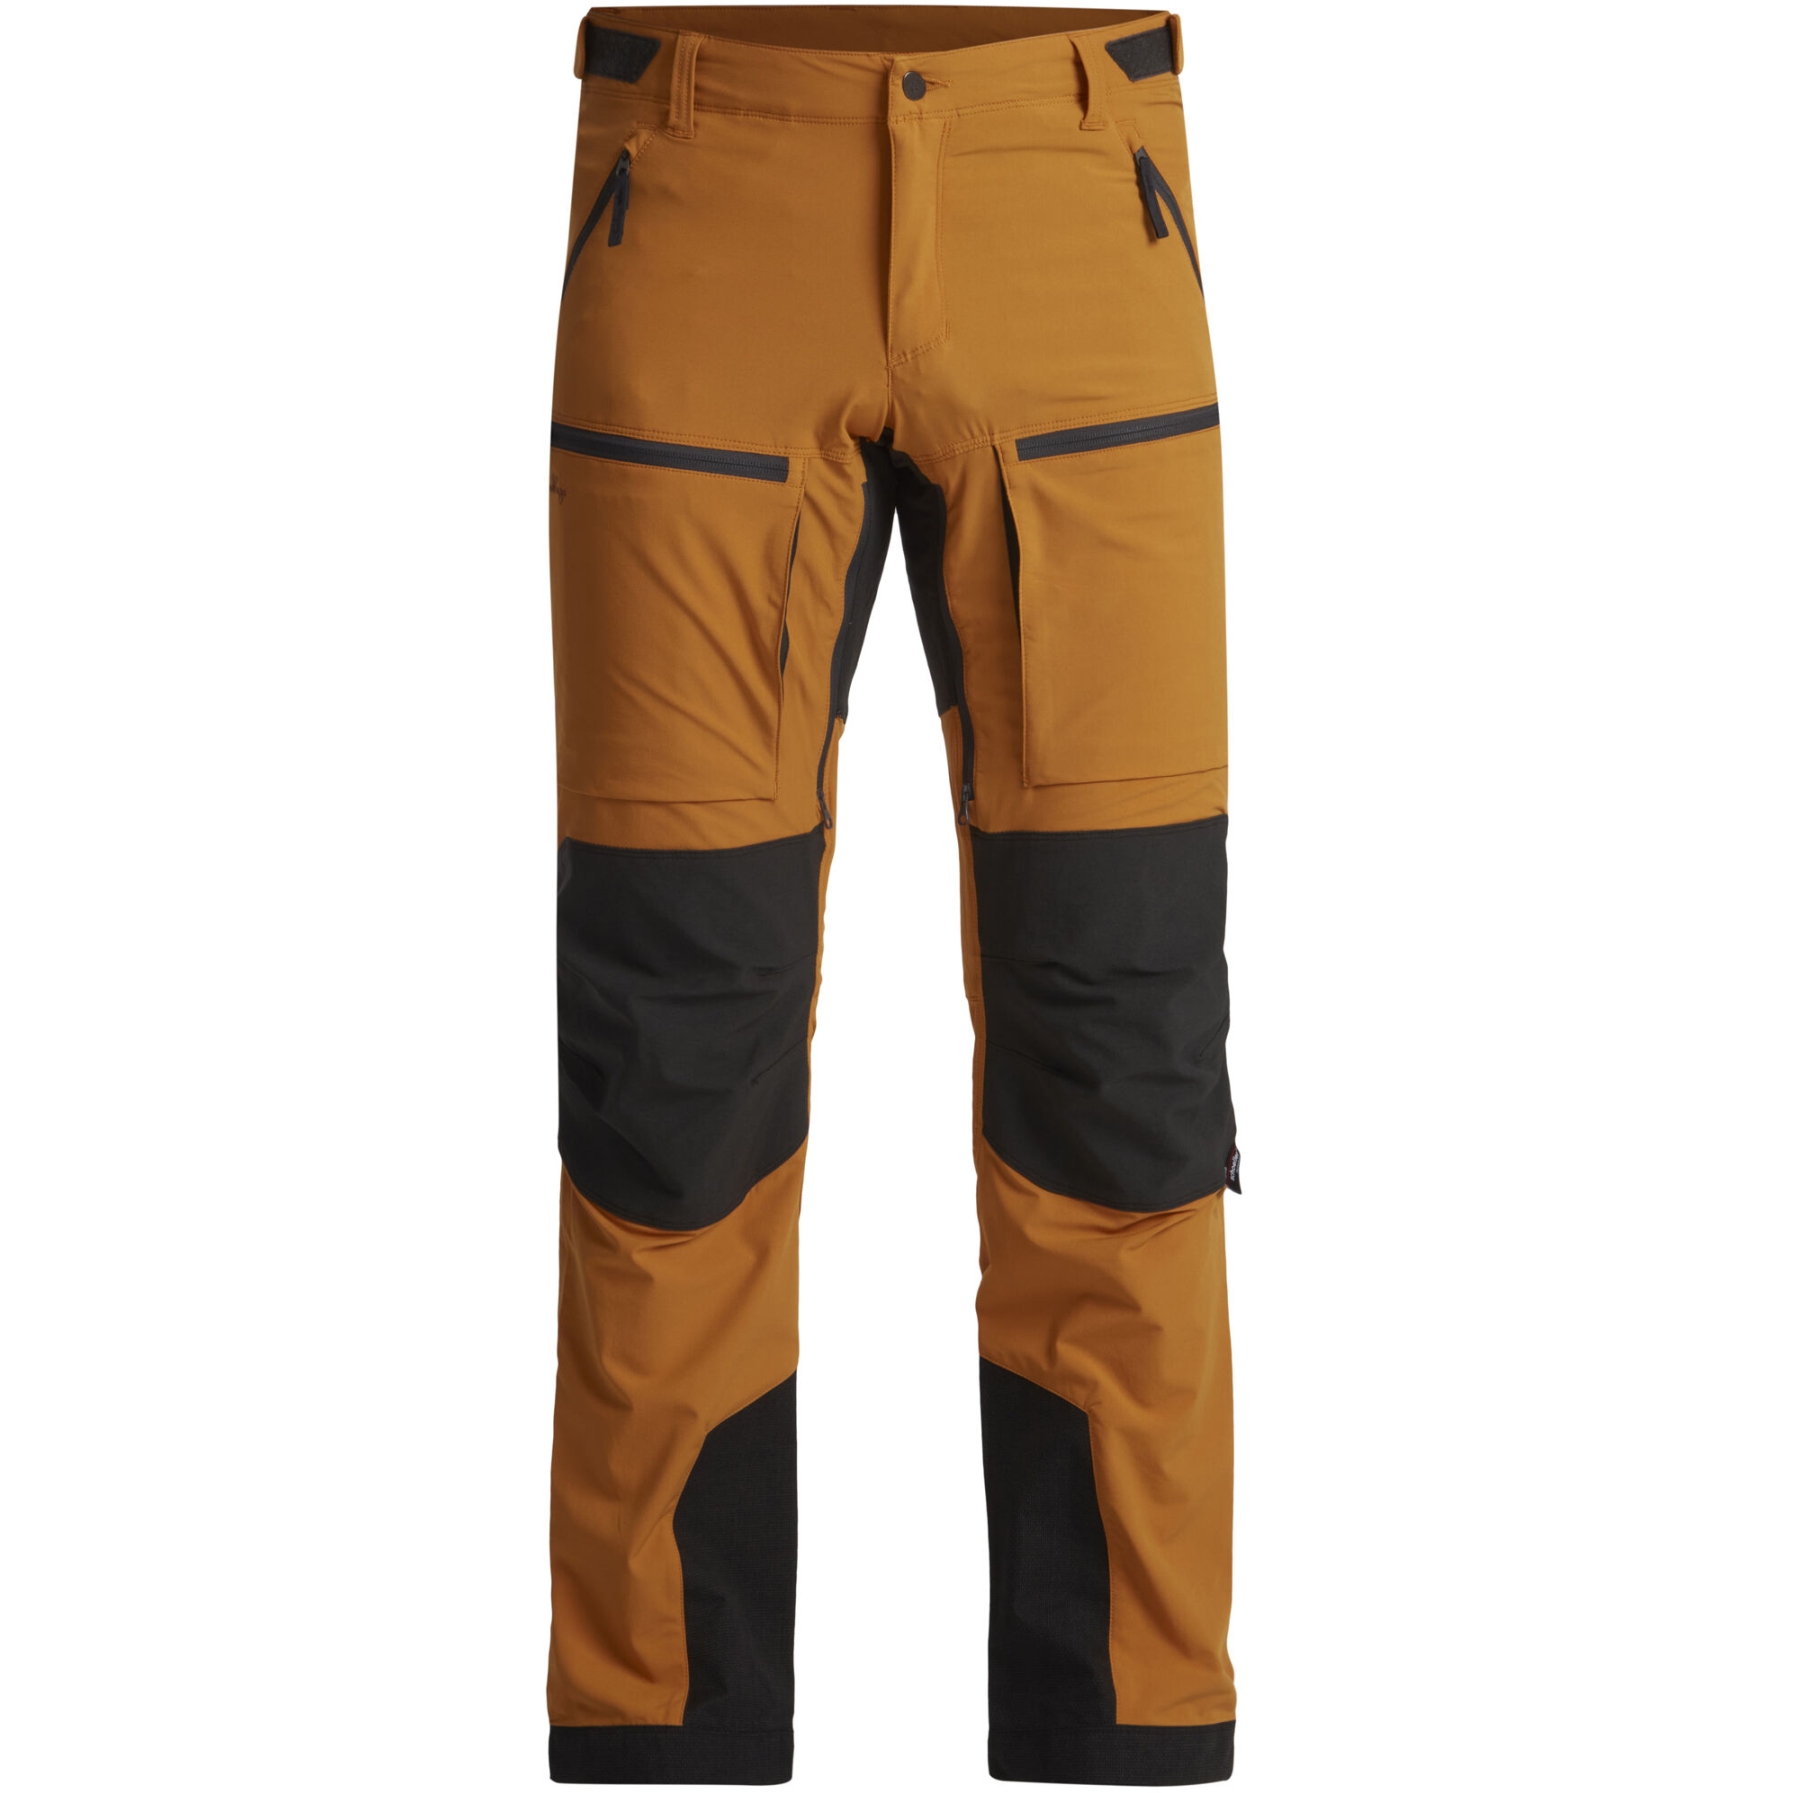 Picture of Lundhags Askro Pro Hiking Pants Men - Gold/Charcoal 209